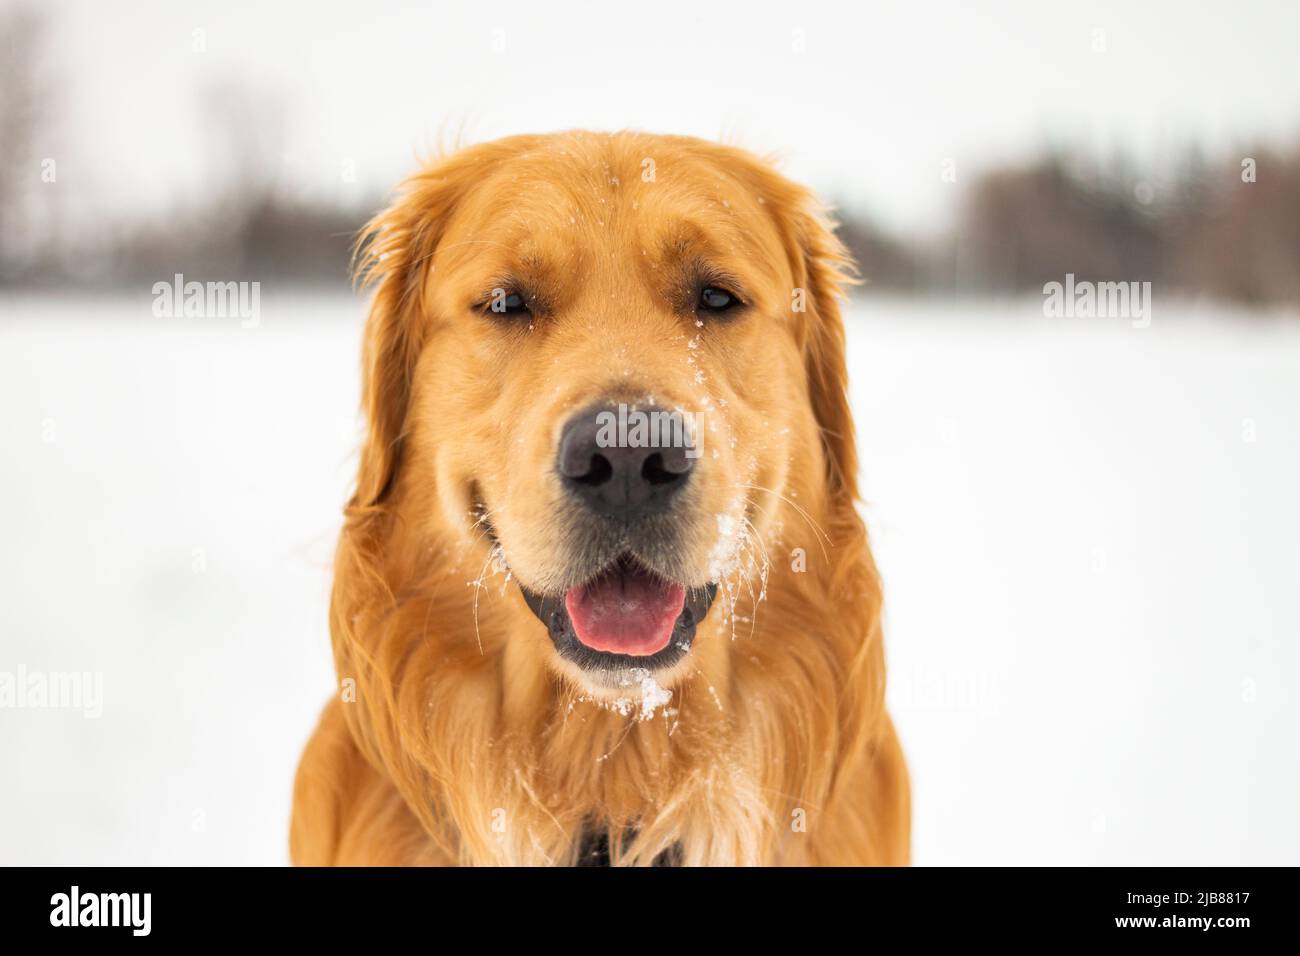 A handsome golden retriever smiles at the camera on a cold, snowy, winter day outside. Stock Photo